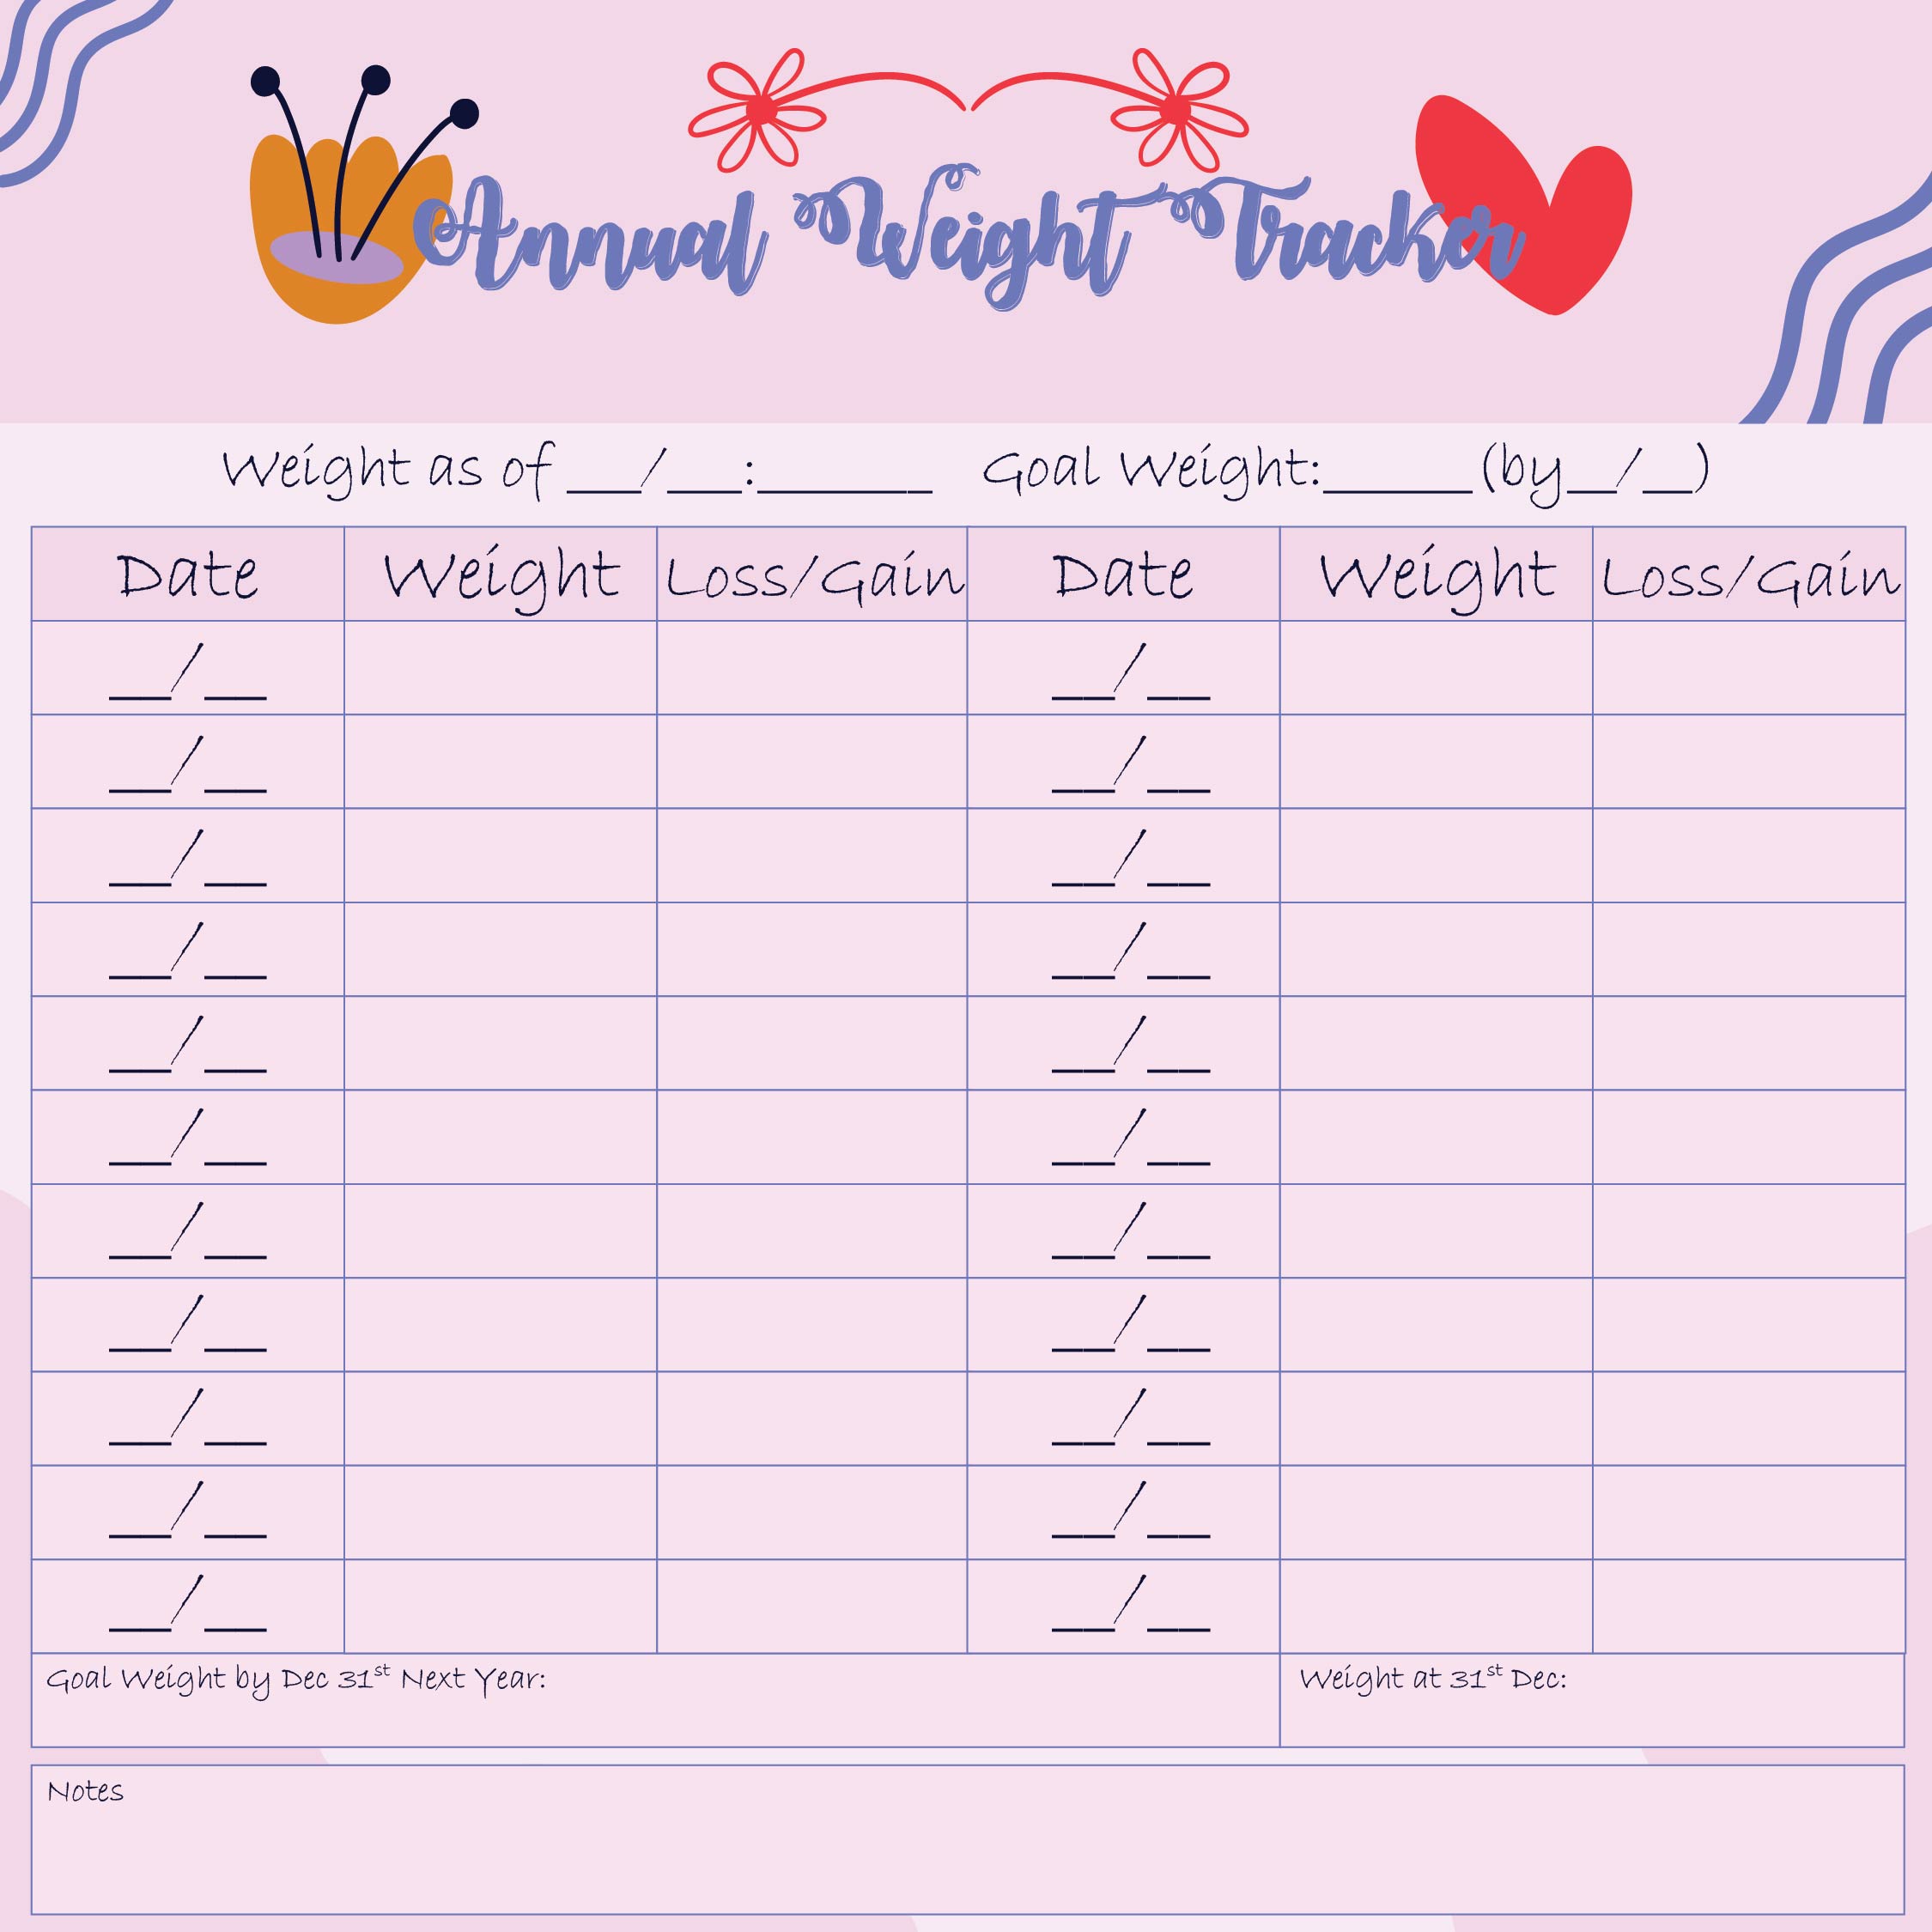 weight tracker chart printable